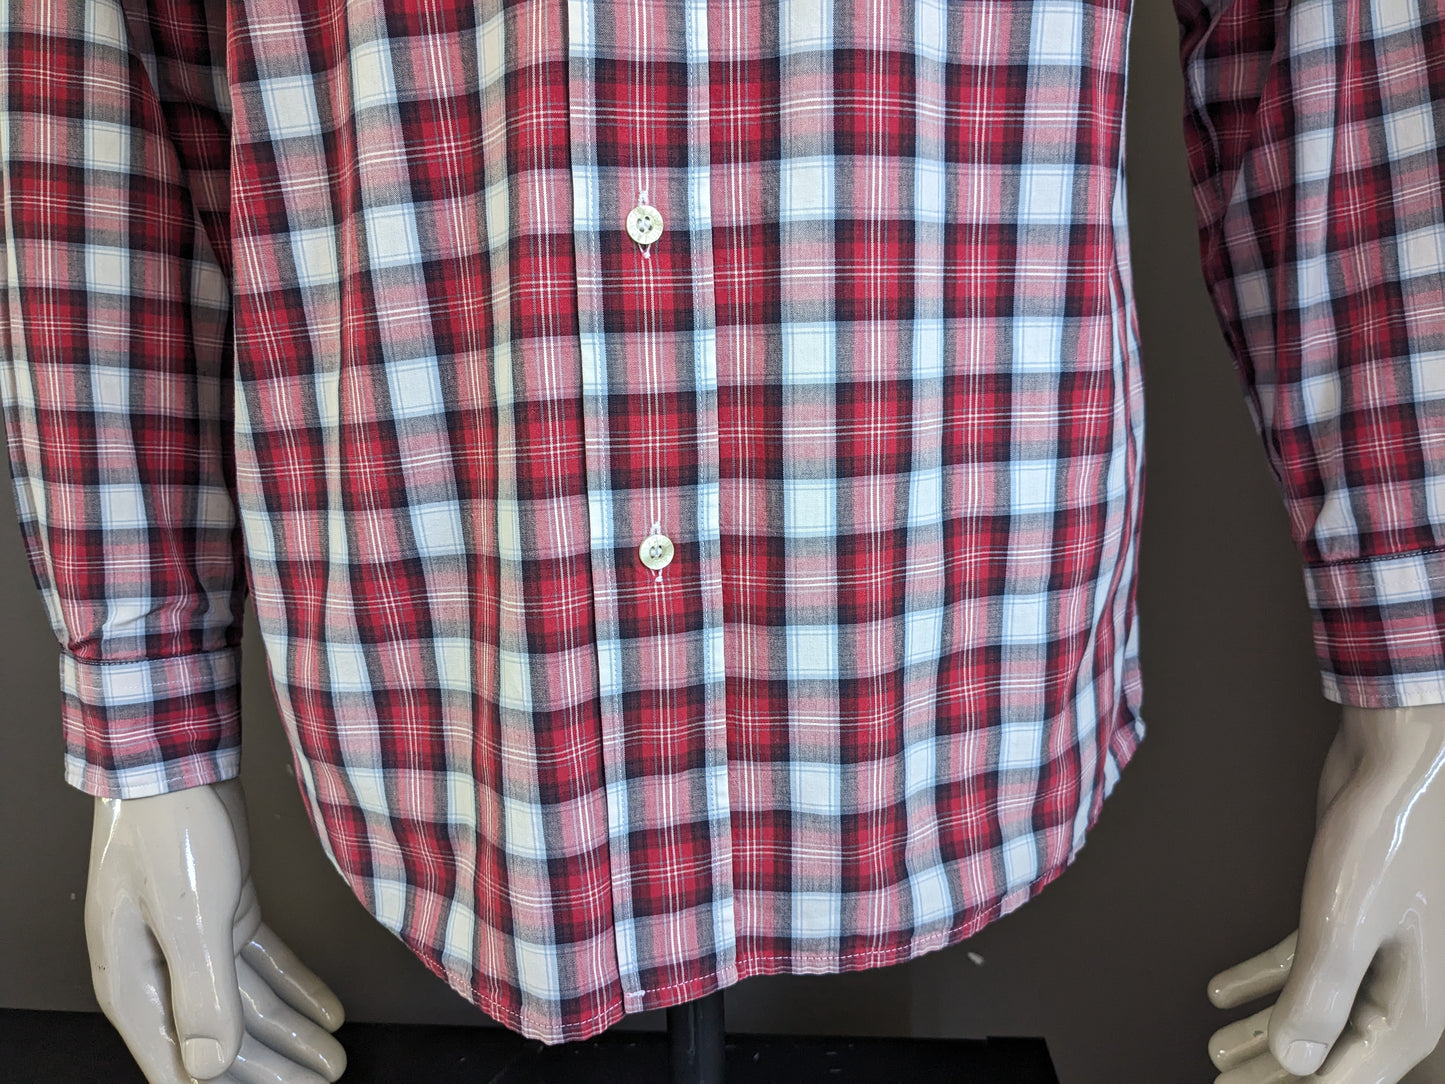 Lacoste shirt. Red gray white blue checked. Size 39 / M.